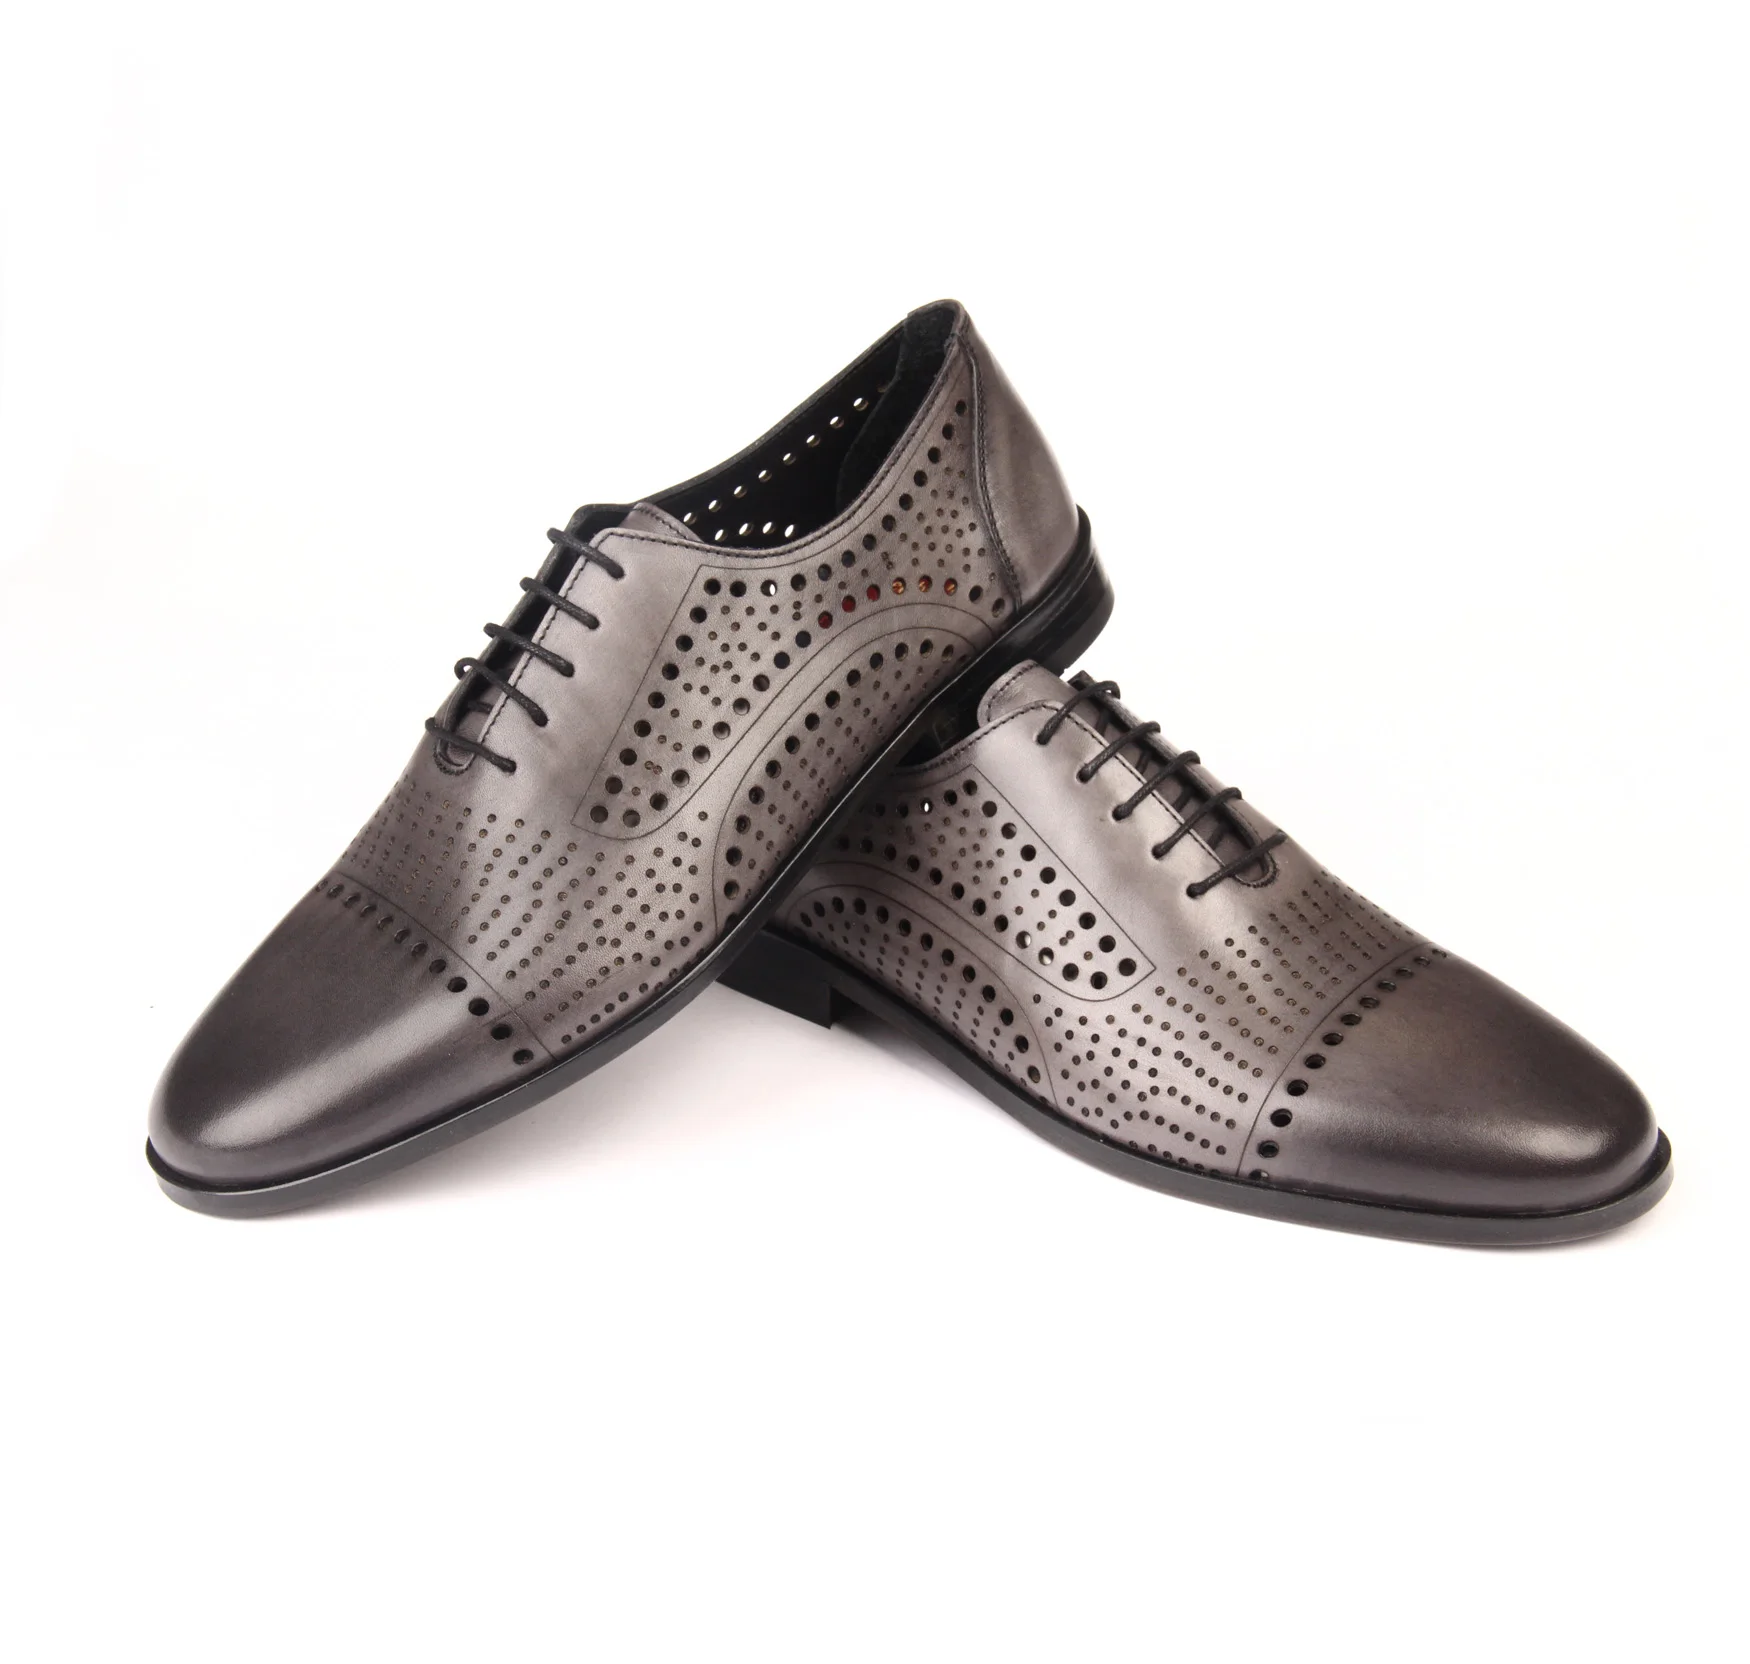 

Handmade Dark Gray Oxford Shoes, Perforated Calf Leather, Multihole Breathable for Summer, Men's Classic Leathersole Footwear